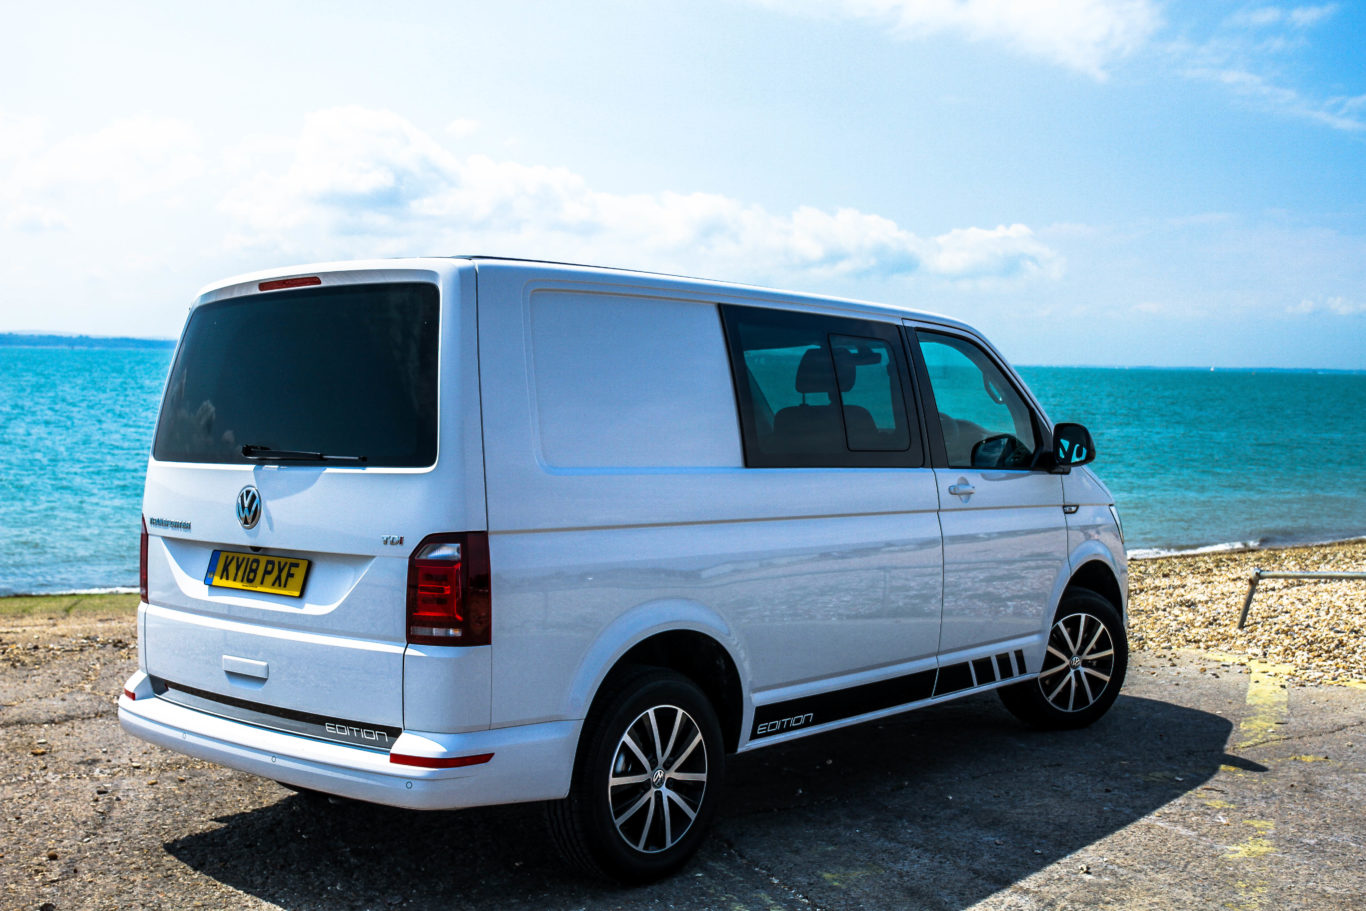 The Transporter certainly looks the part by the sea